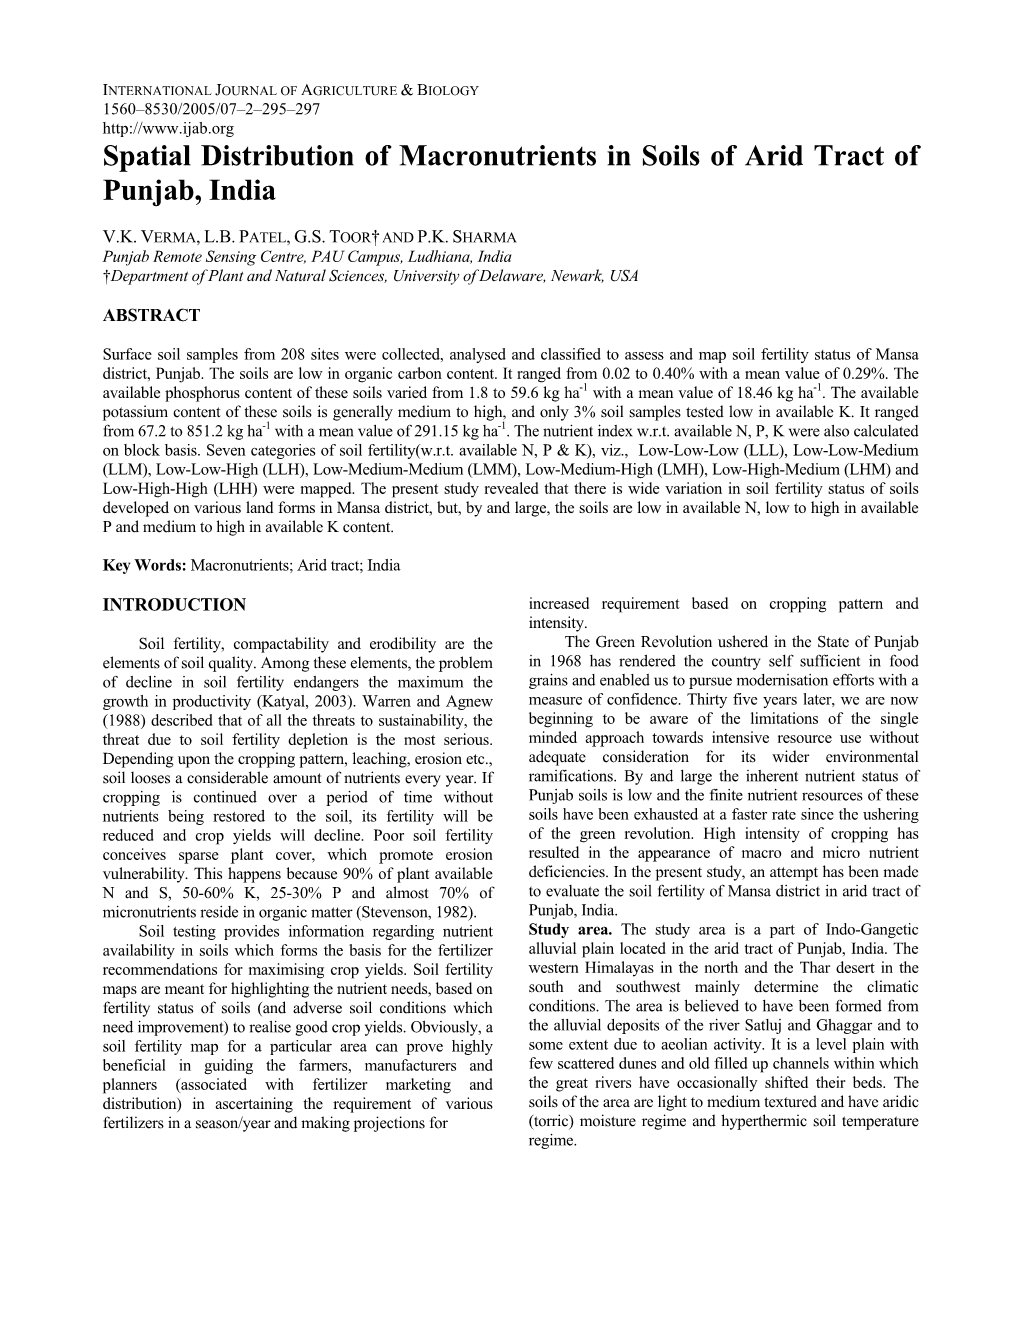 Spatial Distribution of Macronutrients in Soils of Arid Tract of Punjab, India